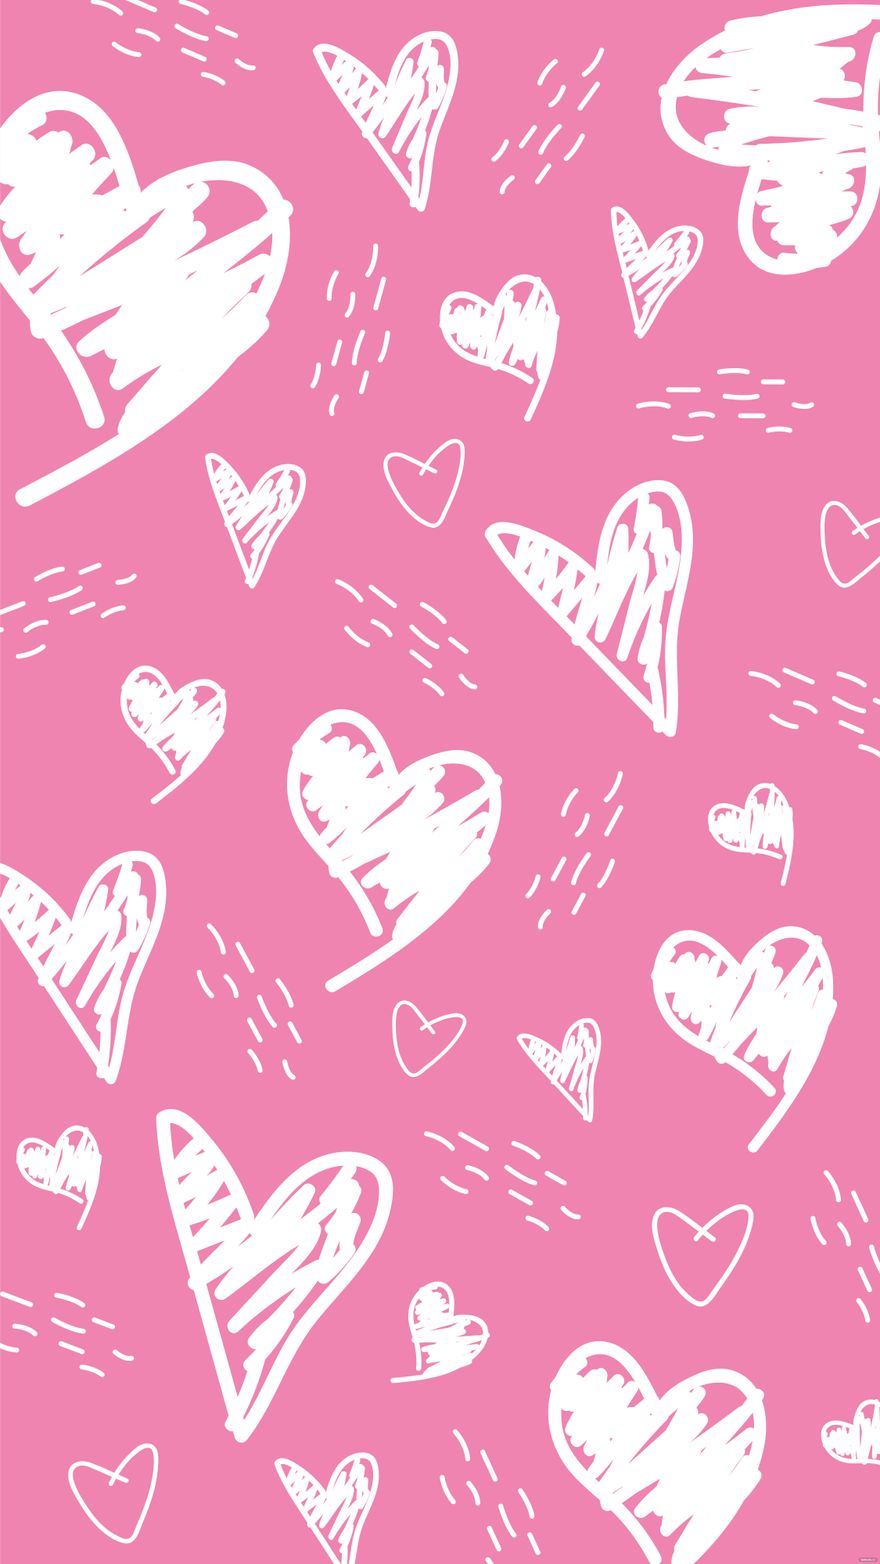 Cute heart wallpaper Images  Search Images on Everypixel